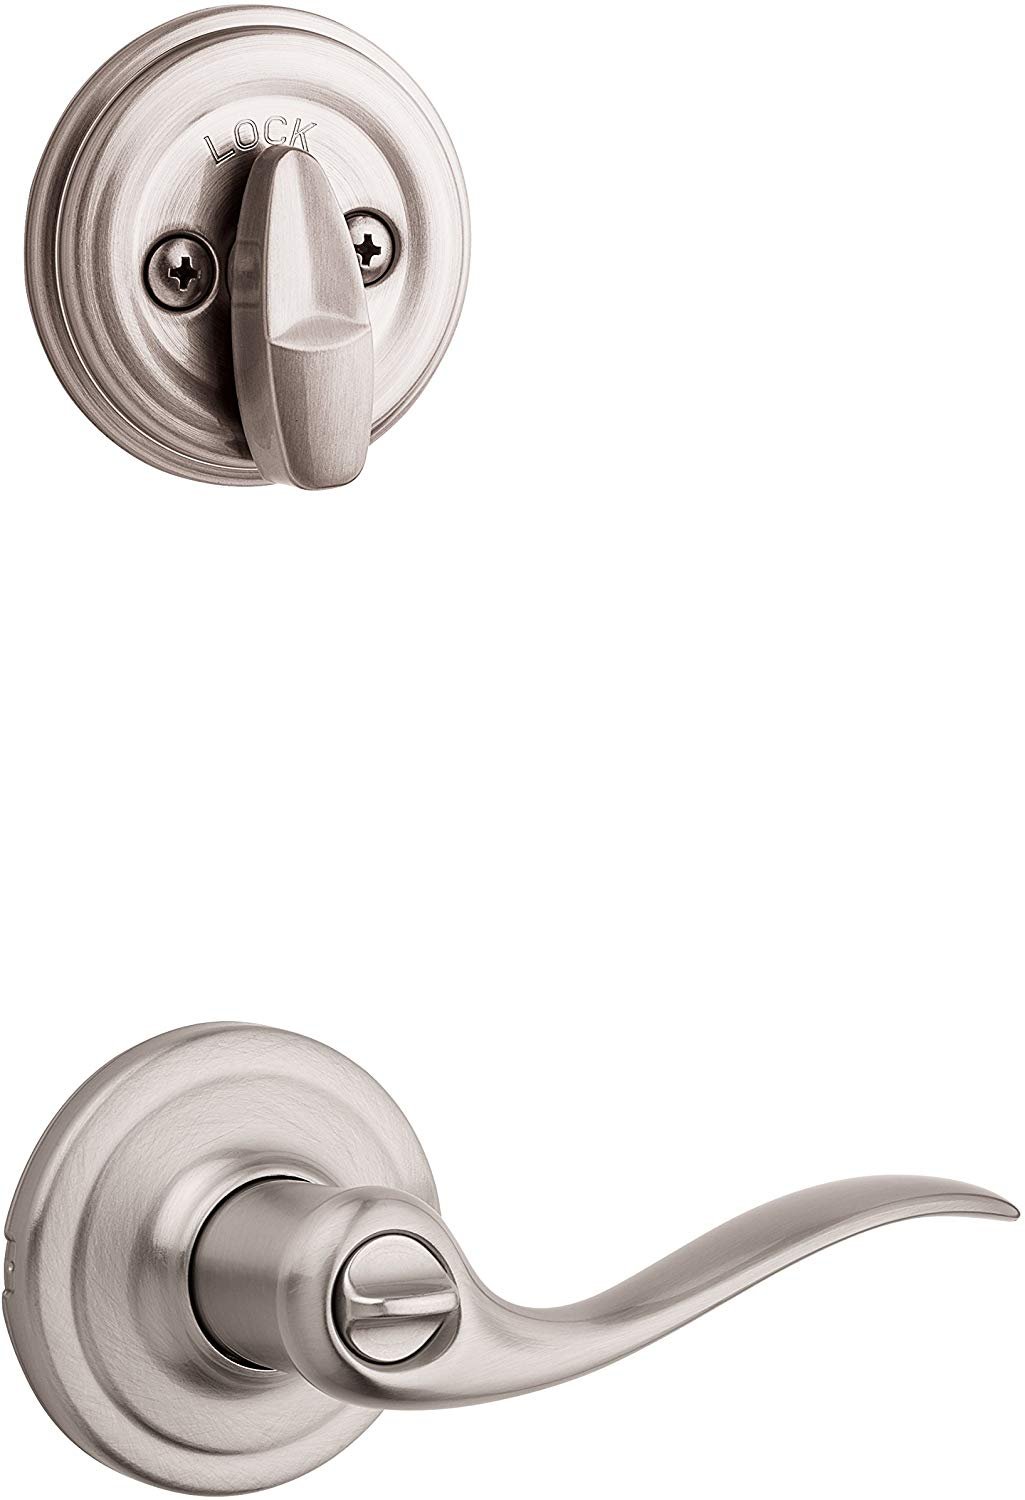 Kwikset 99910-040 991TNL 15 SMT CP K4 Level 991 Tustin Entry Lever and Single  Cylinder Deadbolt Combo Pack Featuring SmartKey in Satin Nickel 